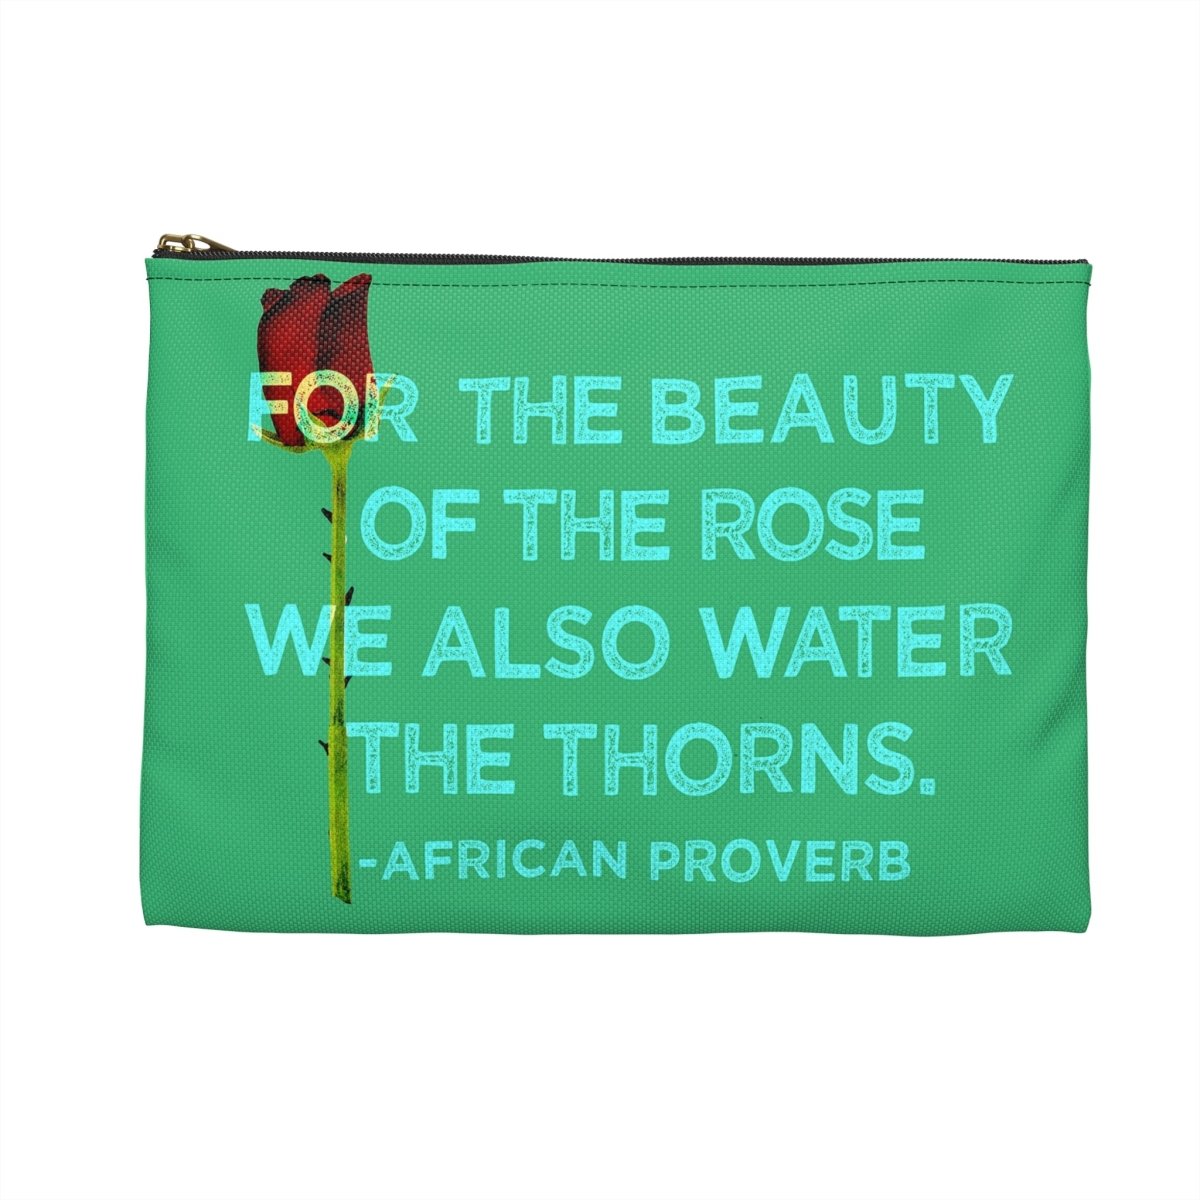 African Proverb Pouch - The Trini Gee